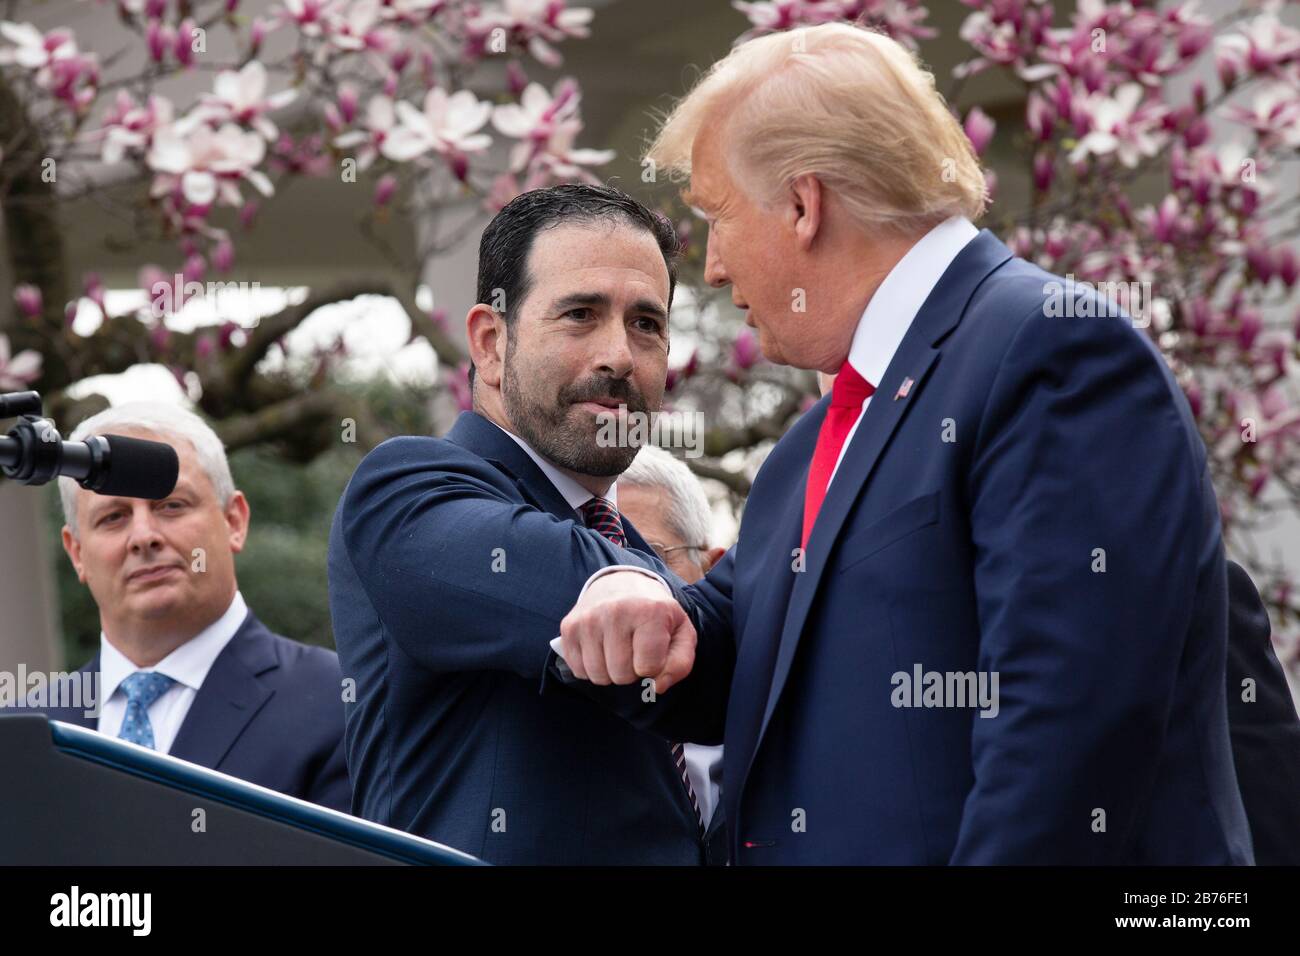 Washington, DC, USA. 13th Mar, 2020. United States President Donald J. Trump, right, bumps elbows with Bruce Greenstein, Executive Vice President and Chief Strategy and Innovation Officer at LHC Group during a news conference in the Rose Garden at the White House in Washington, DC, U.S., on Friday, March 13, 2020. Trump announced that he will be declaring a national emergency in response to the Coronavirus. Credit: Stefani Reynolds/CNP | usage worldwide Credit: dpa/Alamy Live News Stock Photo